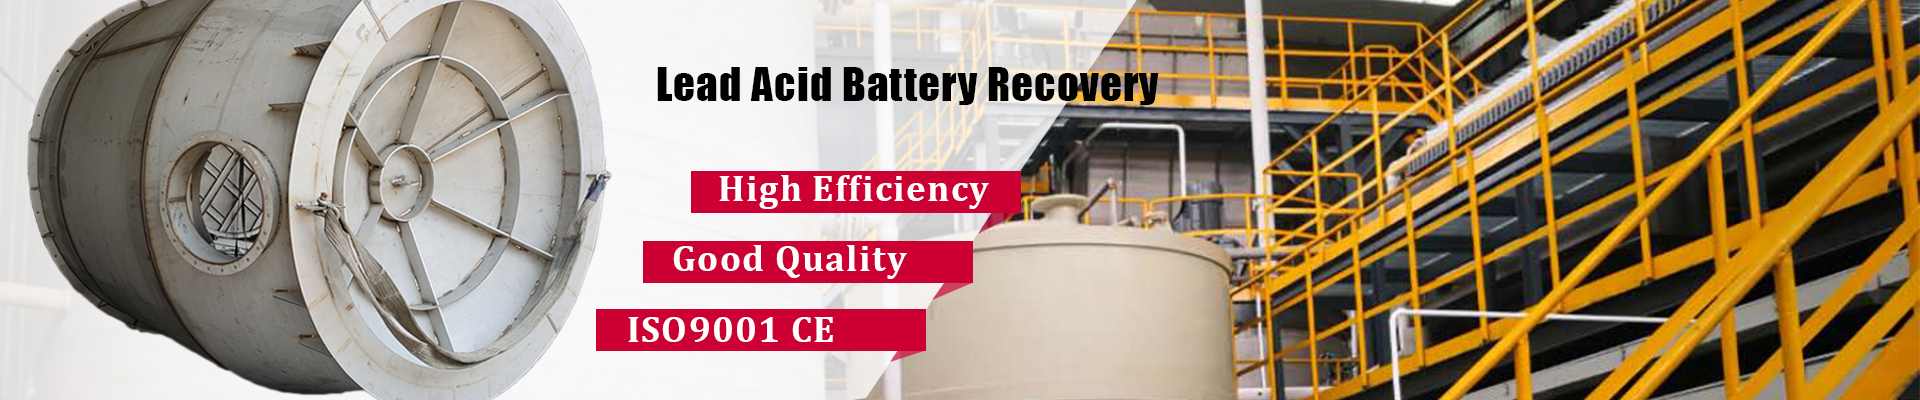 Lead acid battery recovery and regeneration system